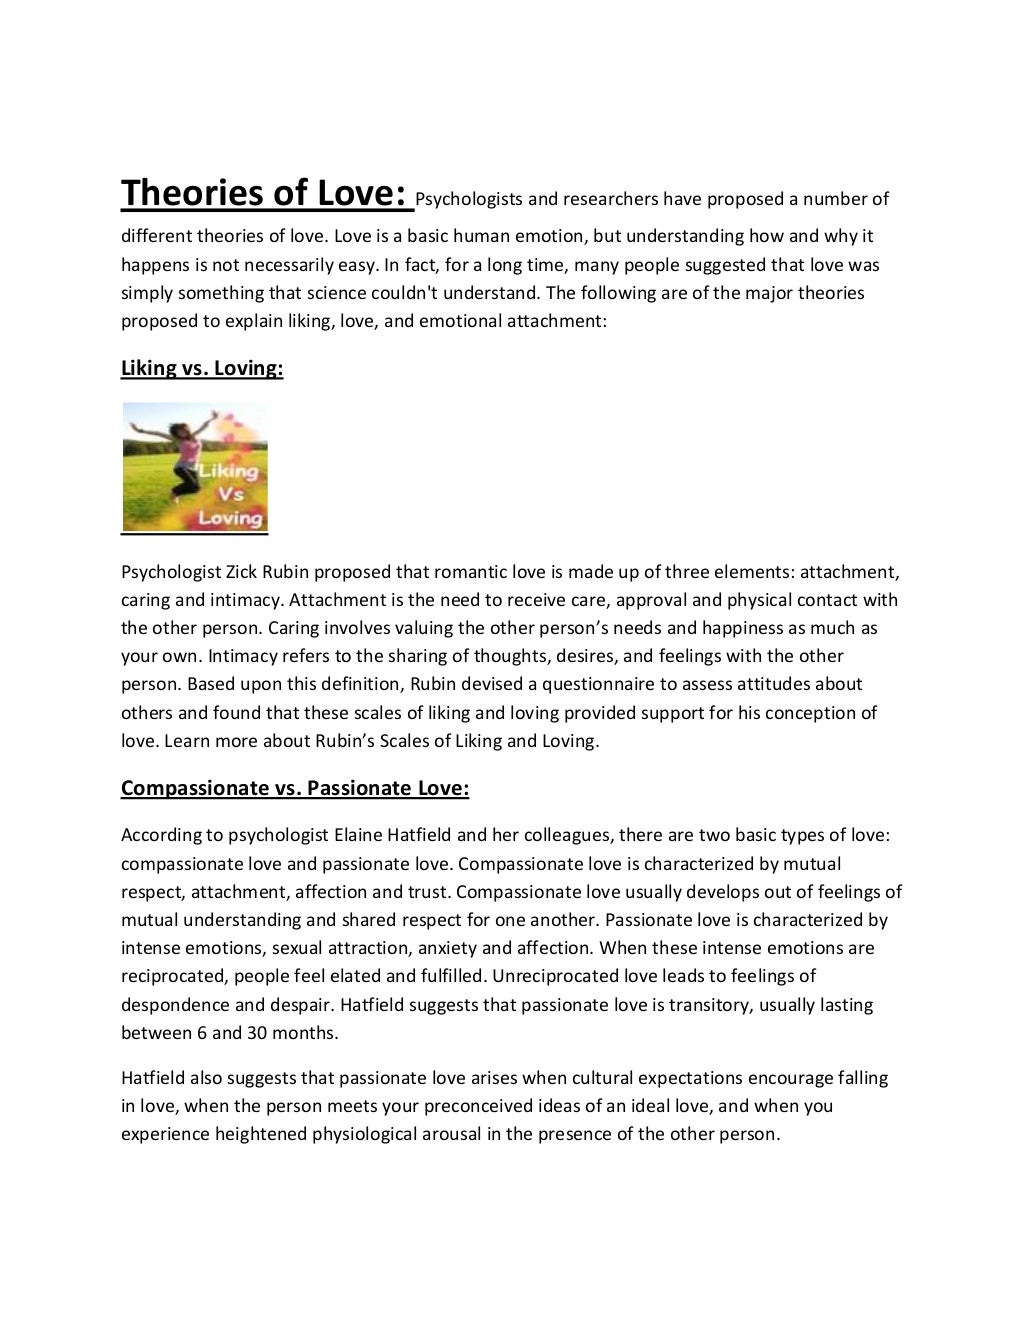 research about love relationships